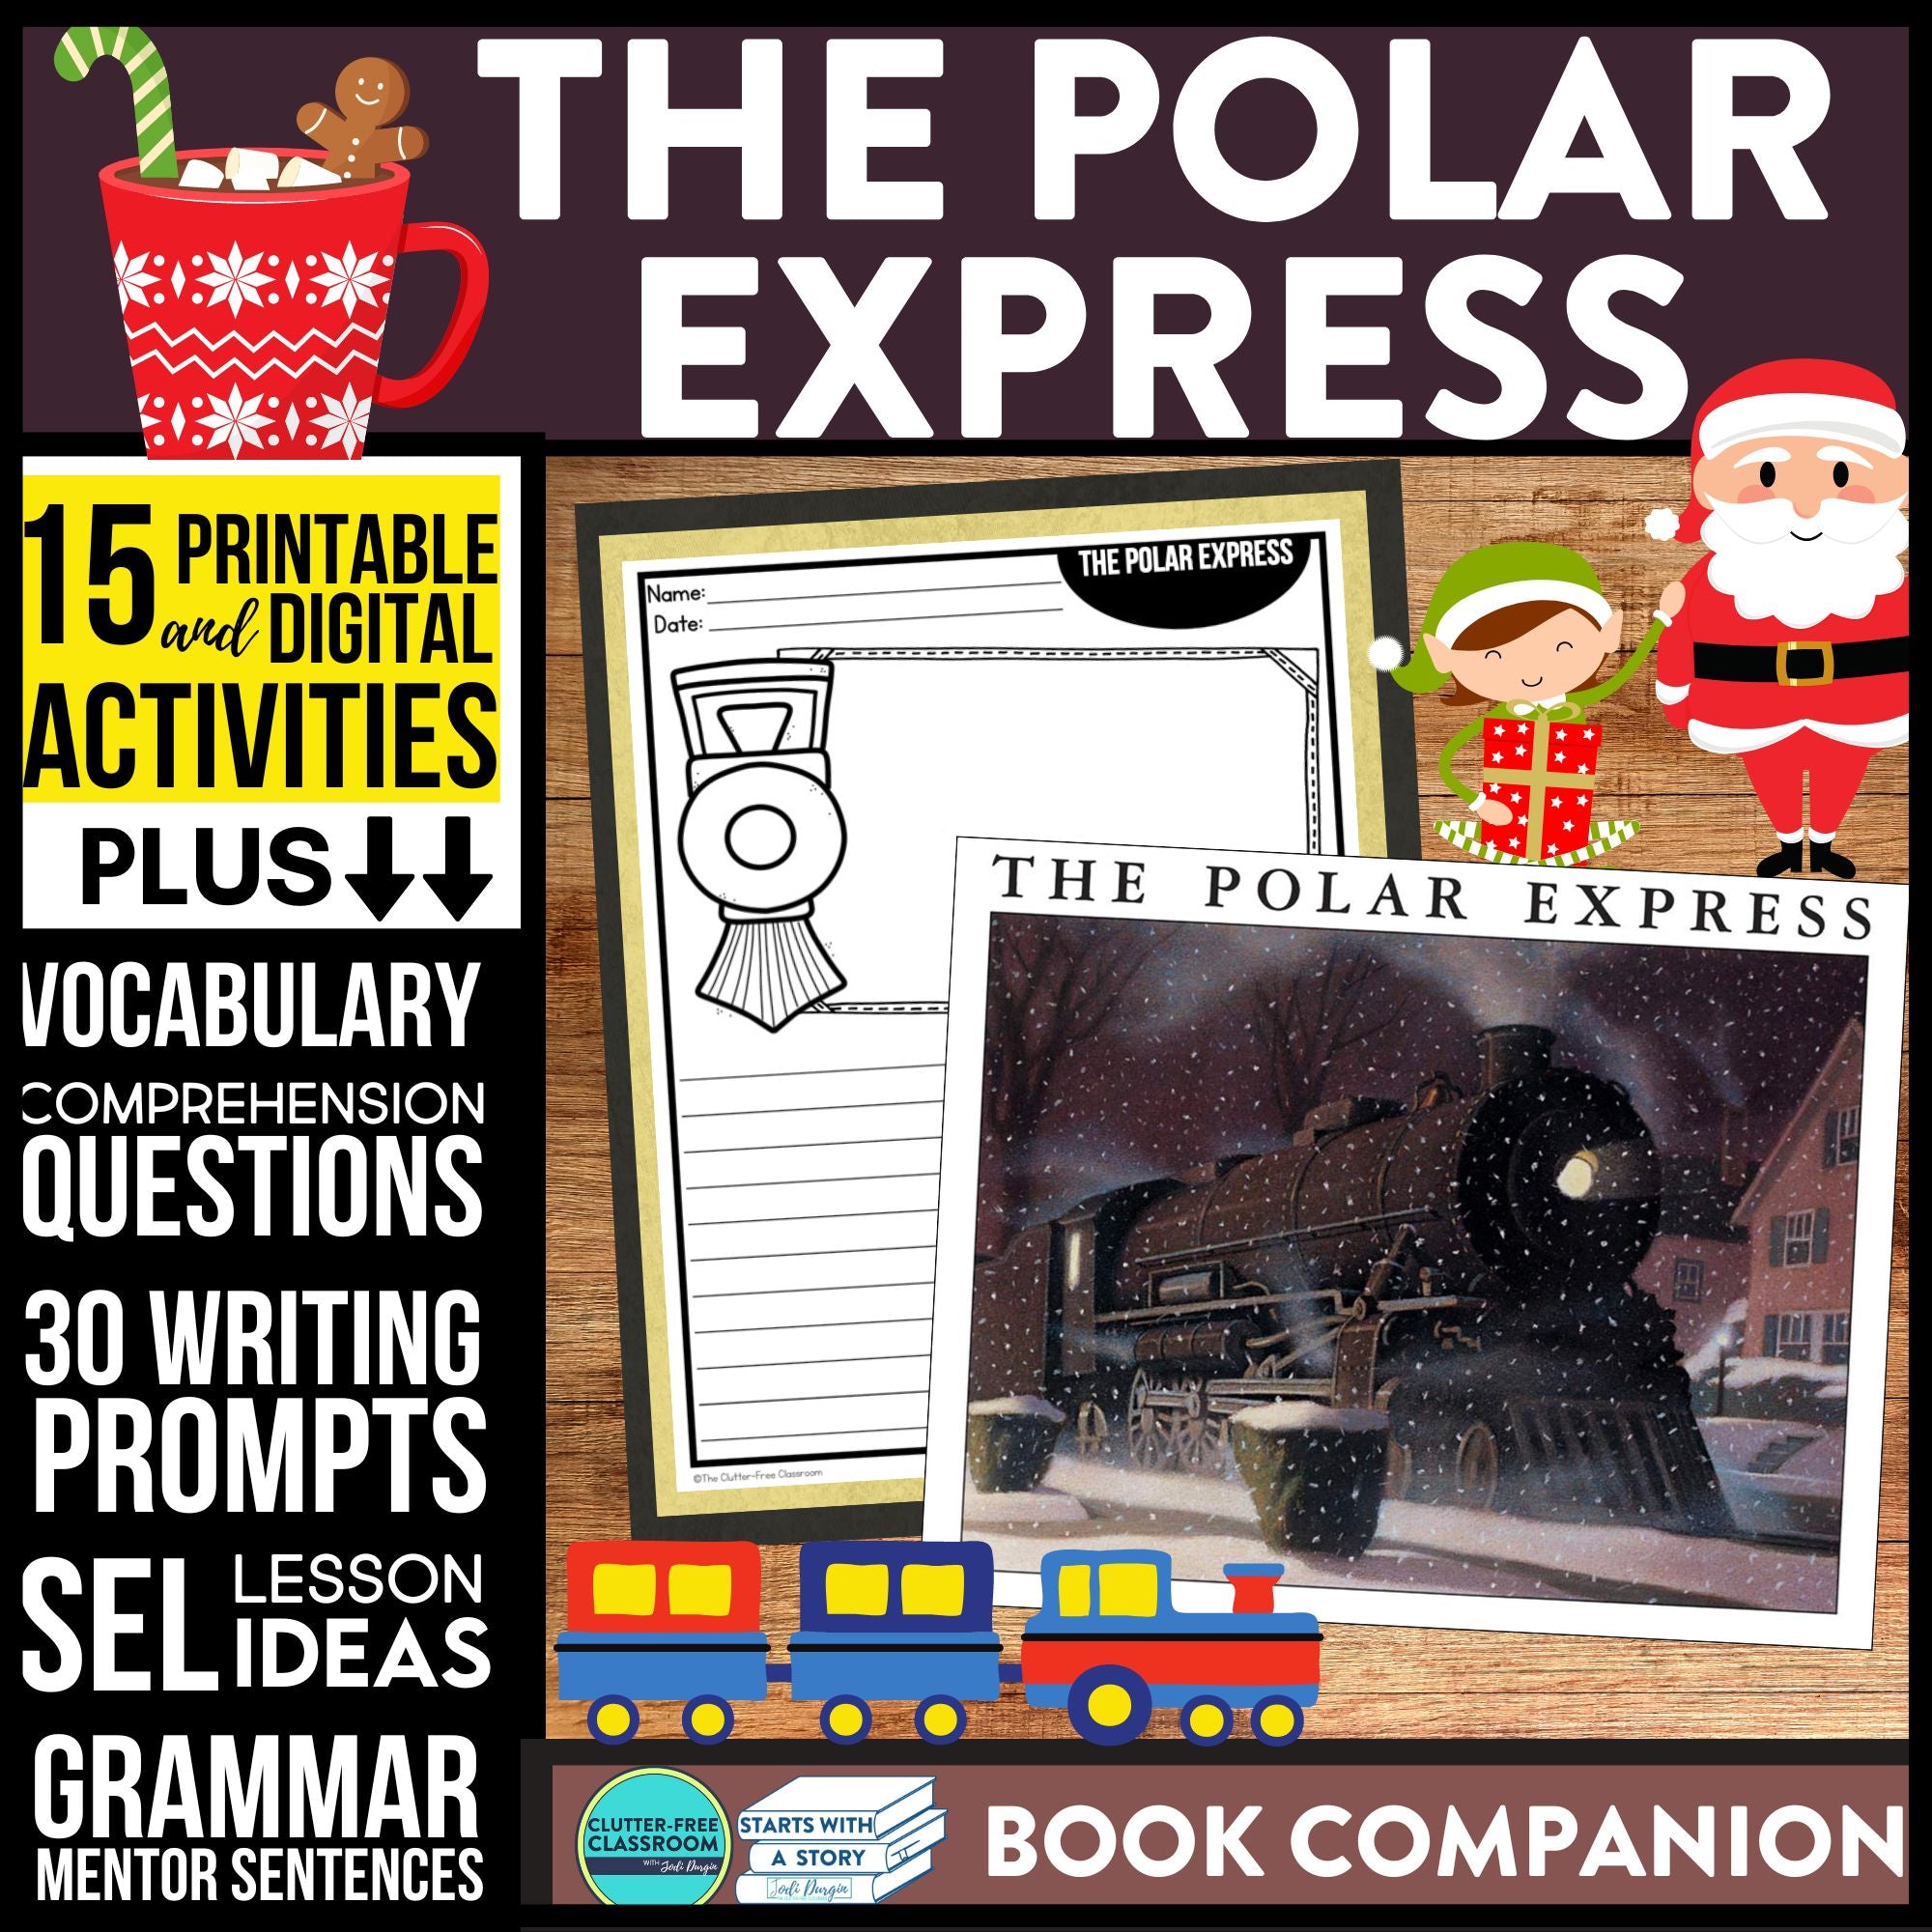 The Polar Express activities and lesson plan ideas